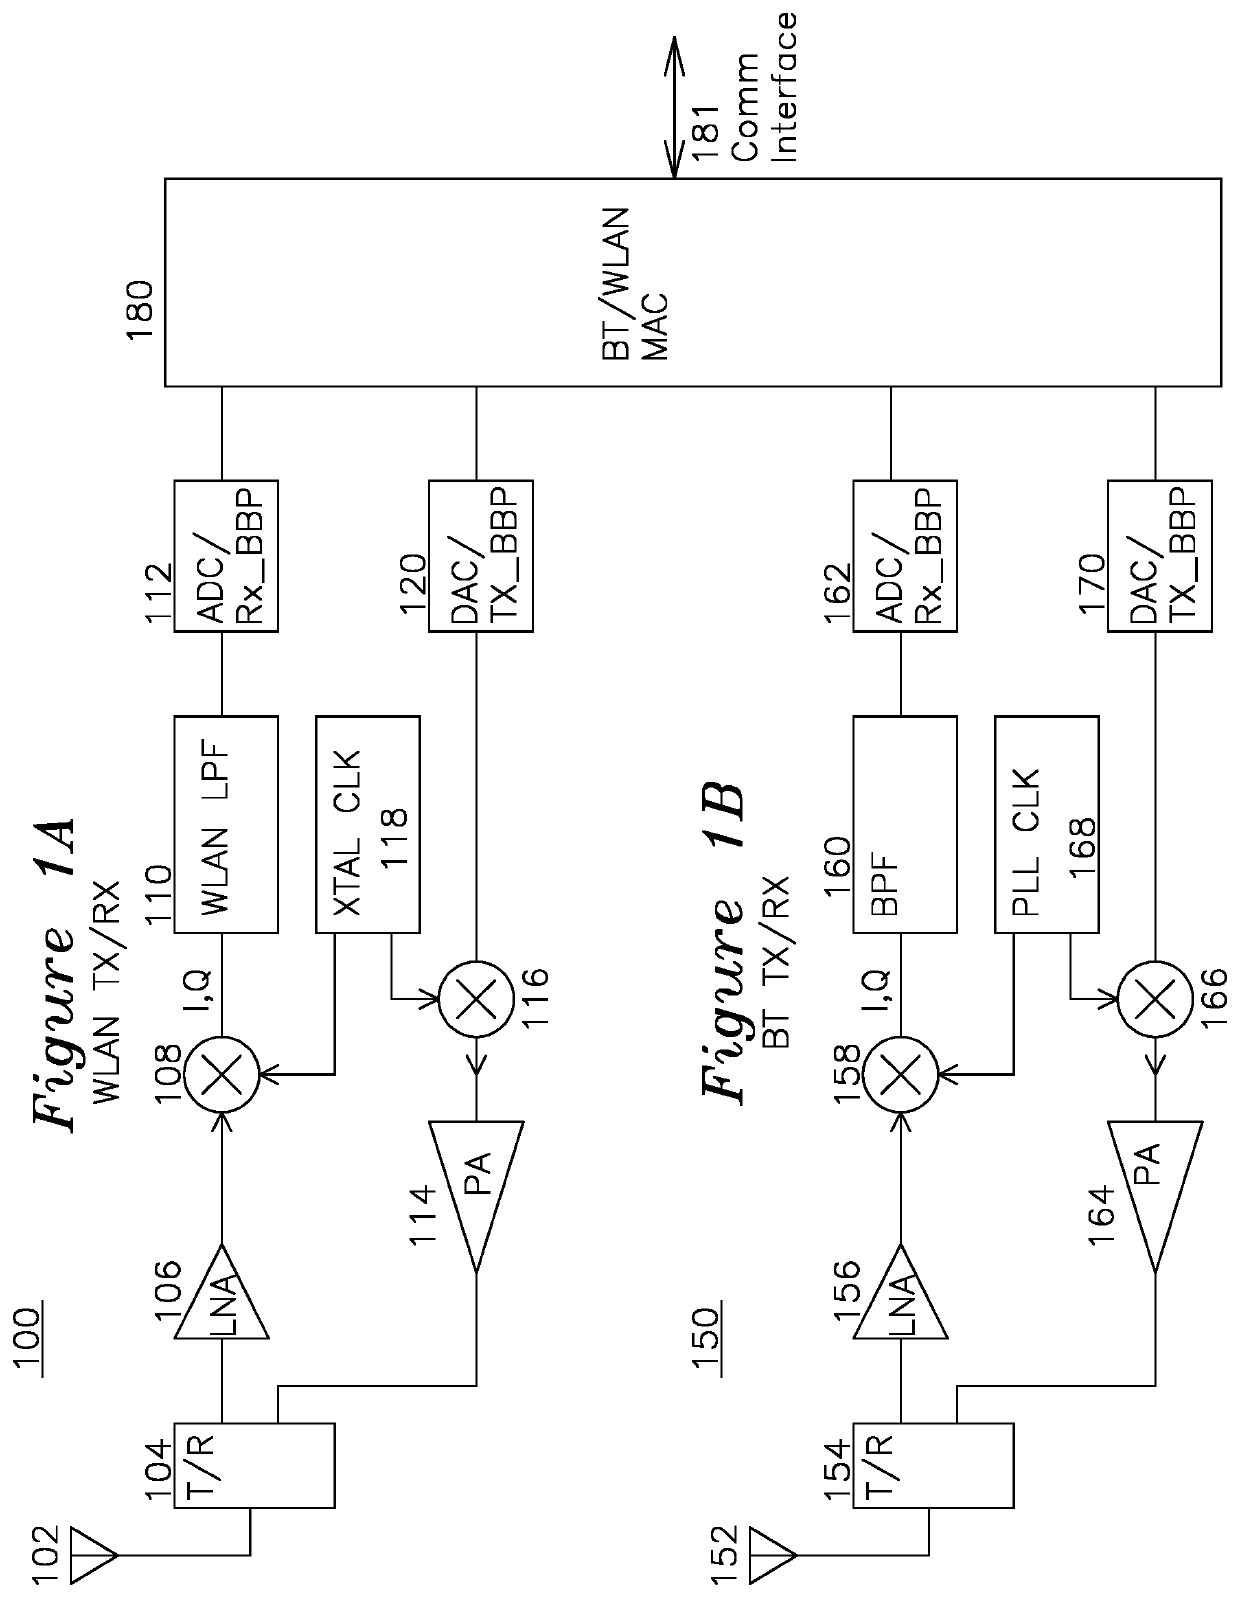 Multiplexed signal processing system for Bluetooth and WLAN transceiver